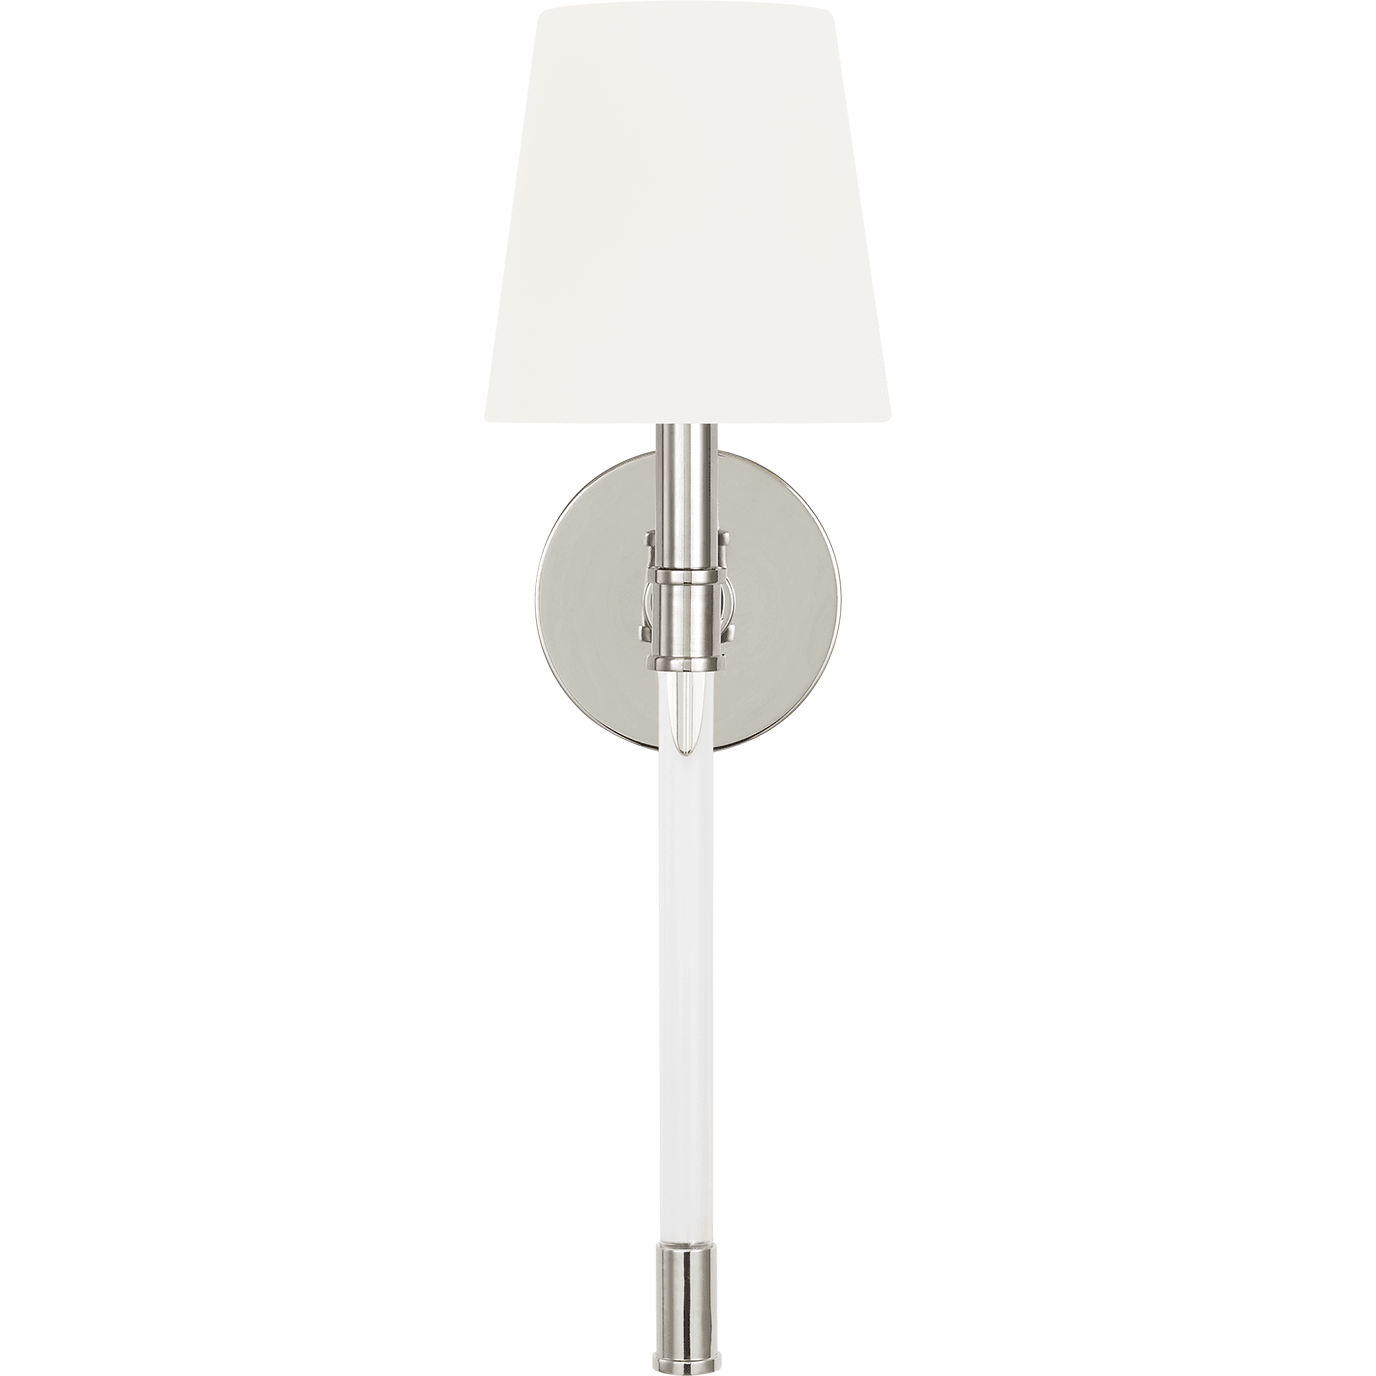 Visual Comfort Studio Collection - Hanover Sconce - Lights Canada